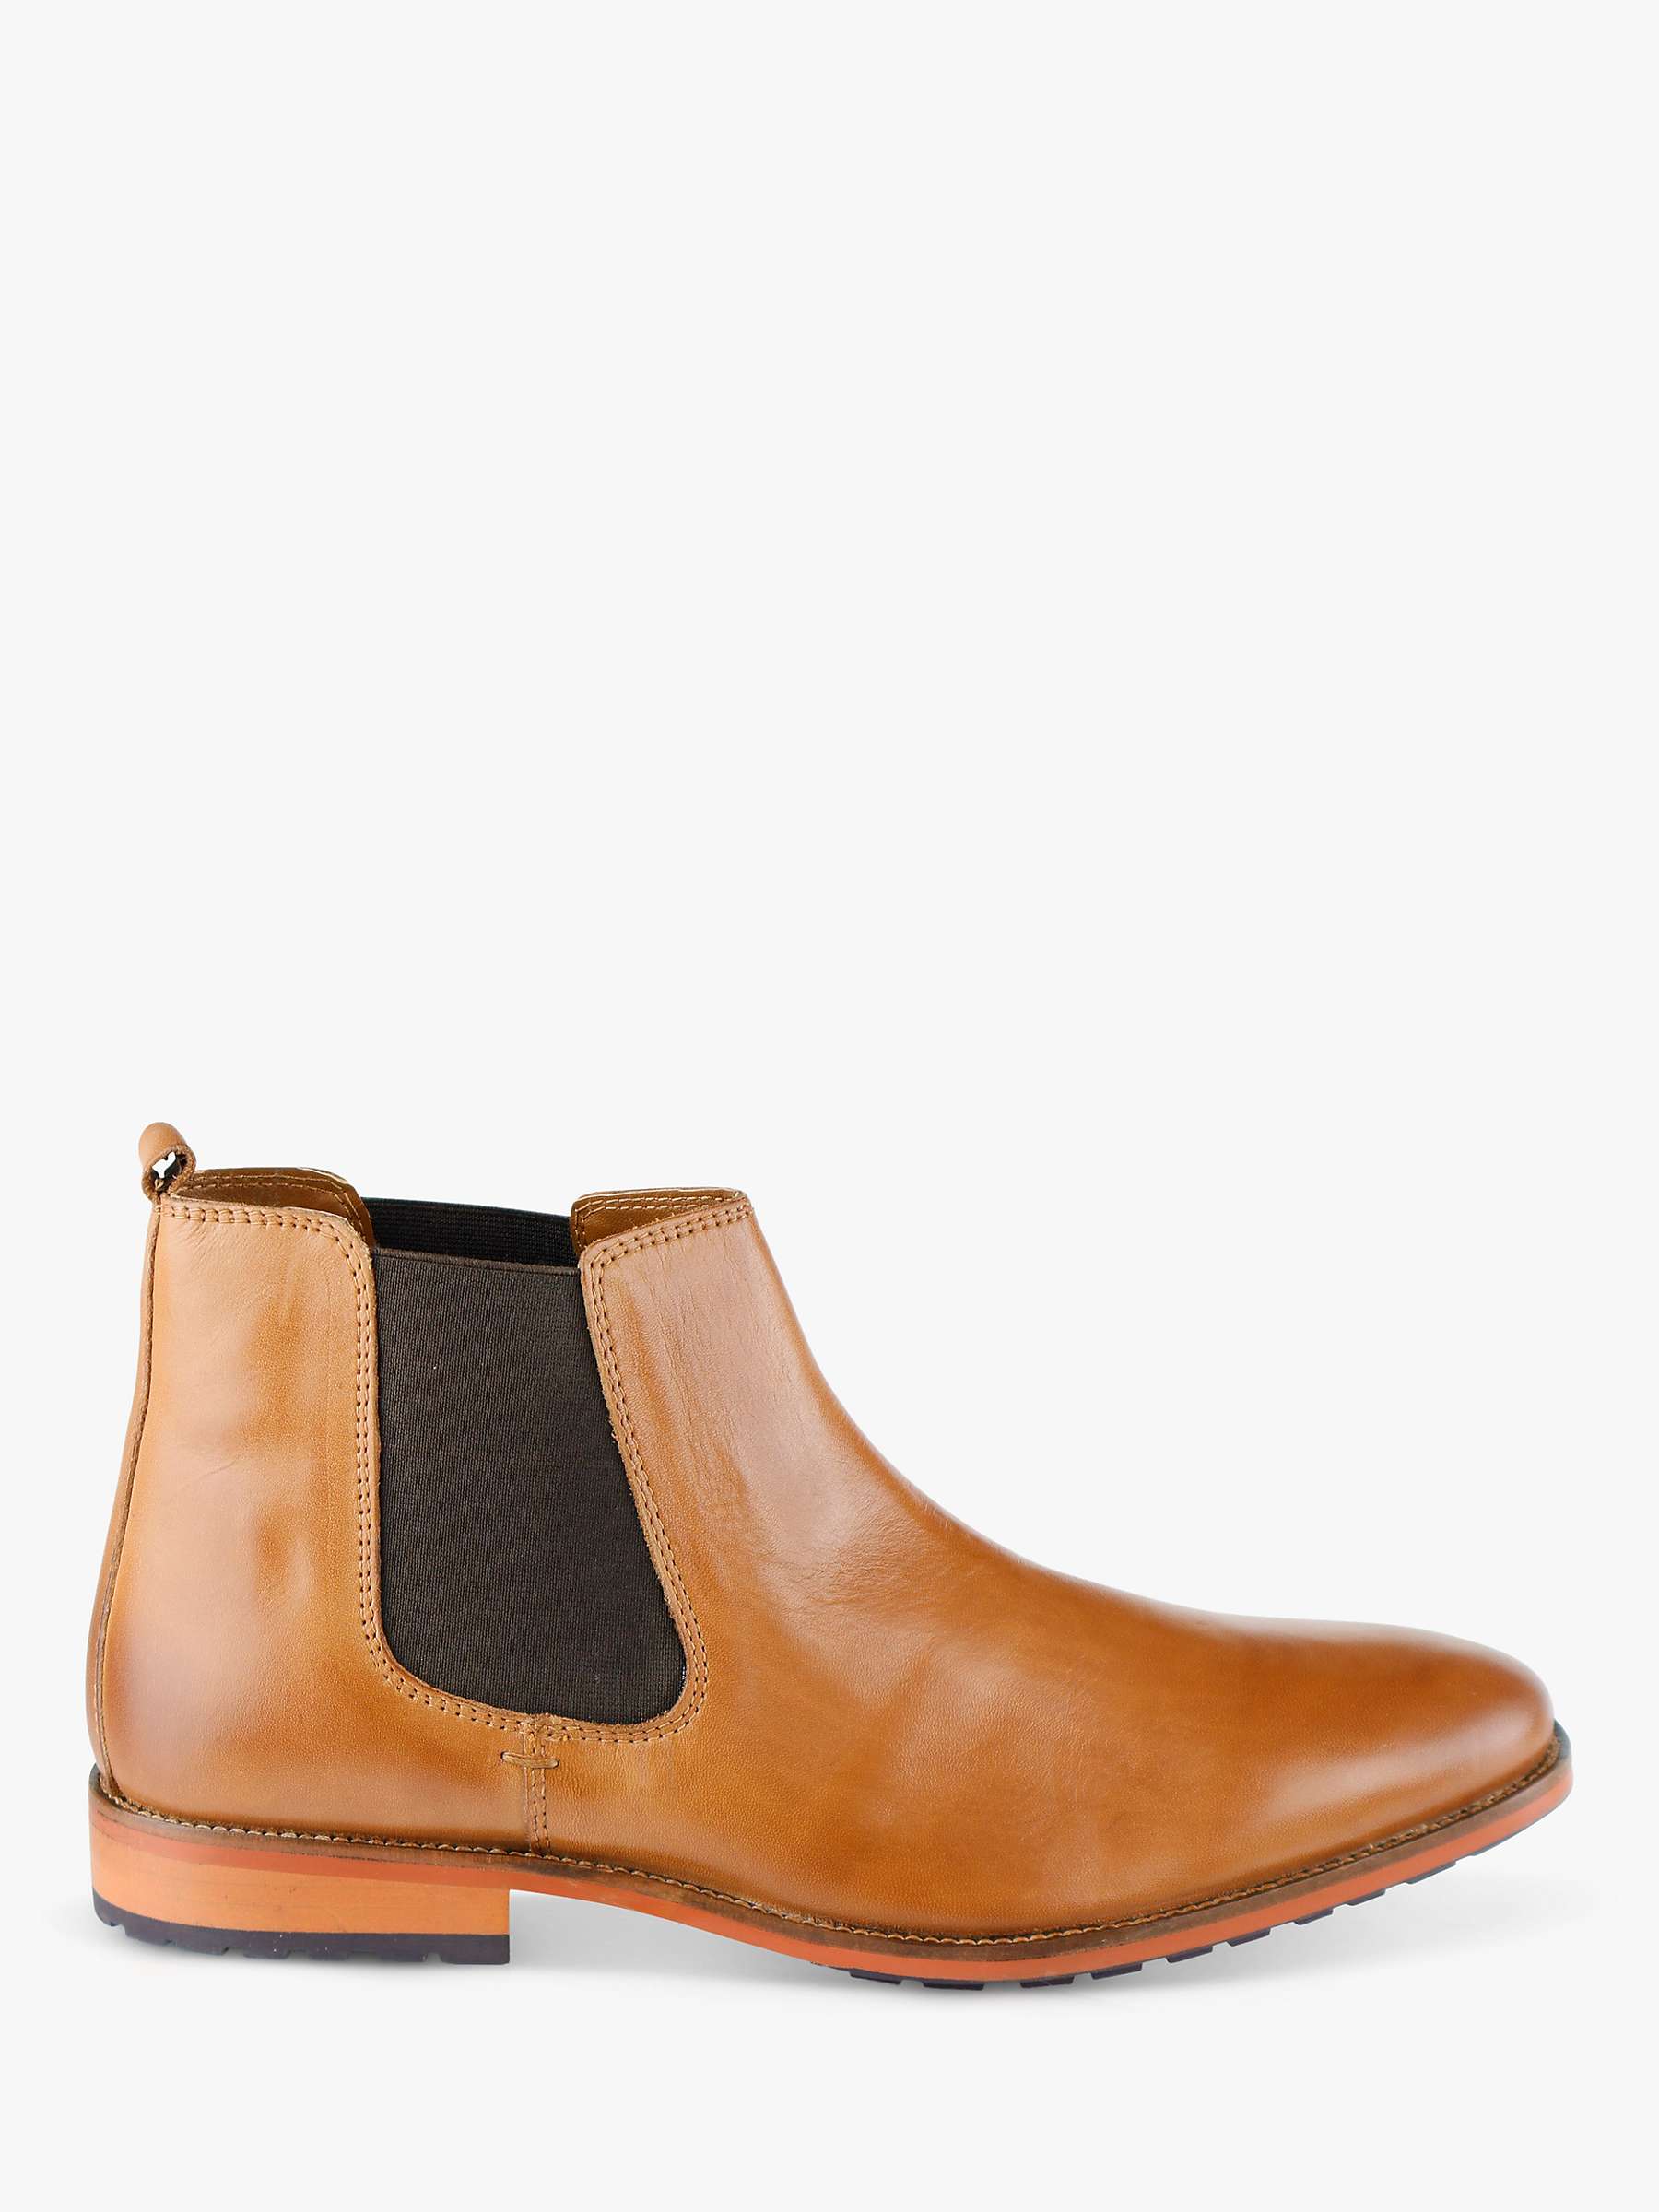 Buy Silver Street London Argyll Leather Chelsea Boots Online at johnlewis.com